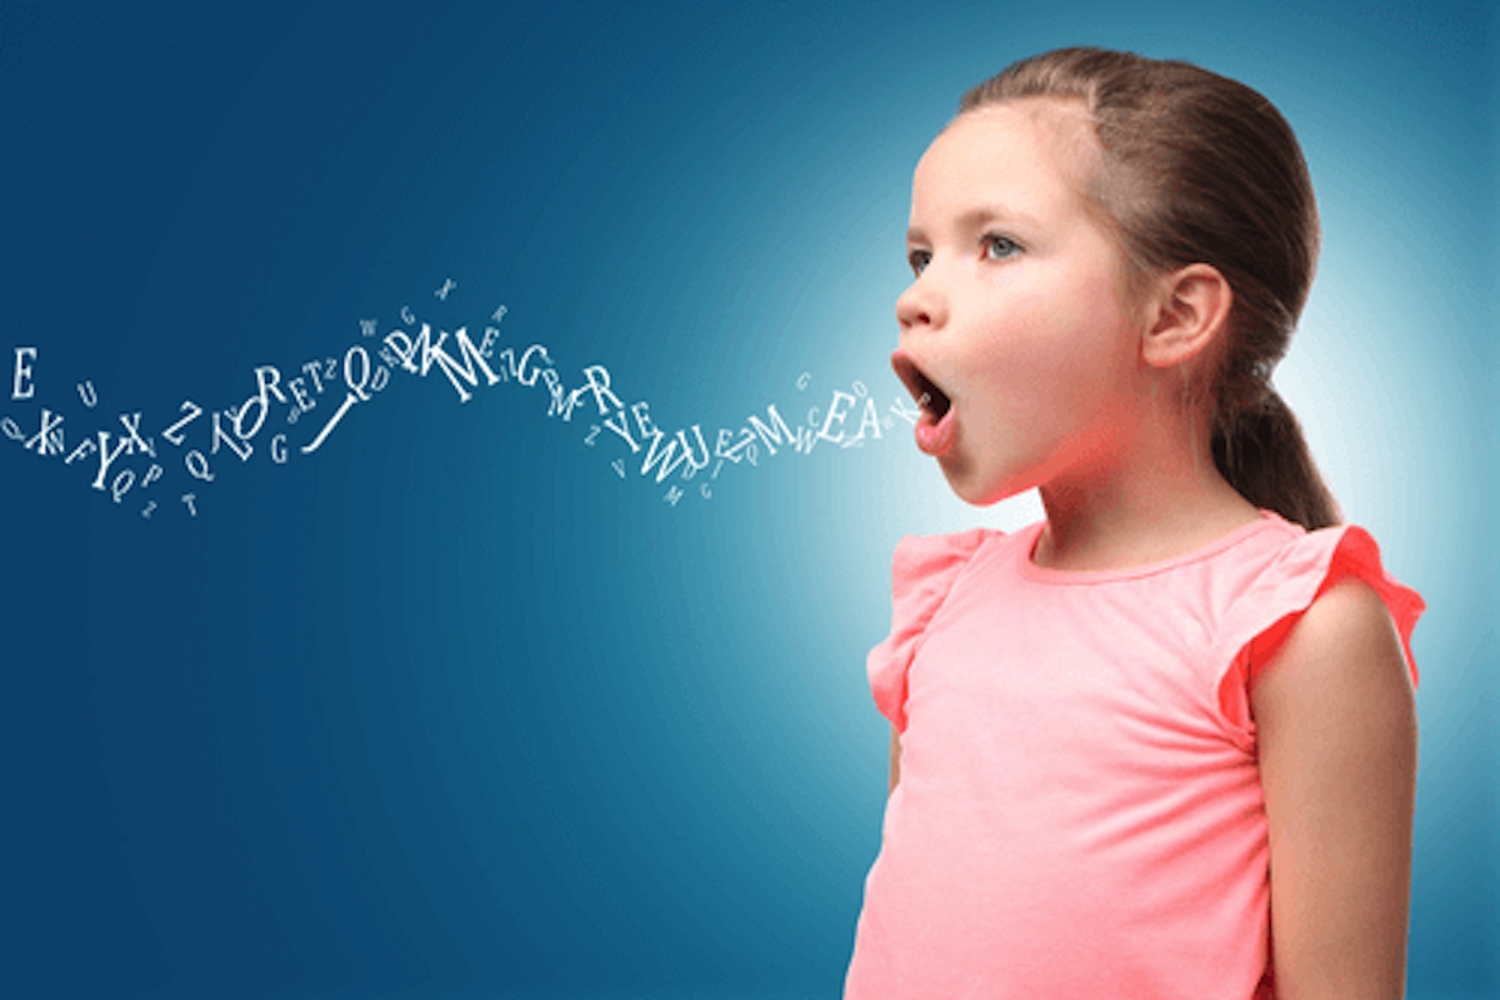 voice and speech disorders ppt